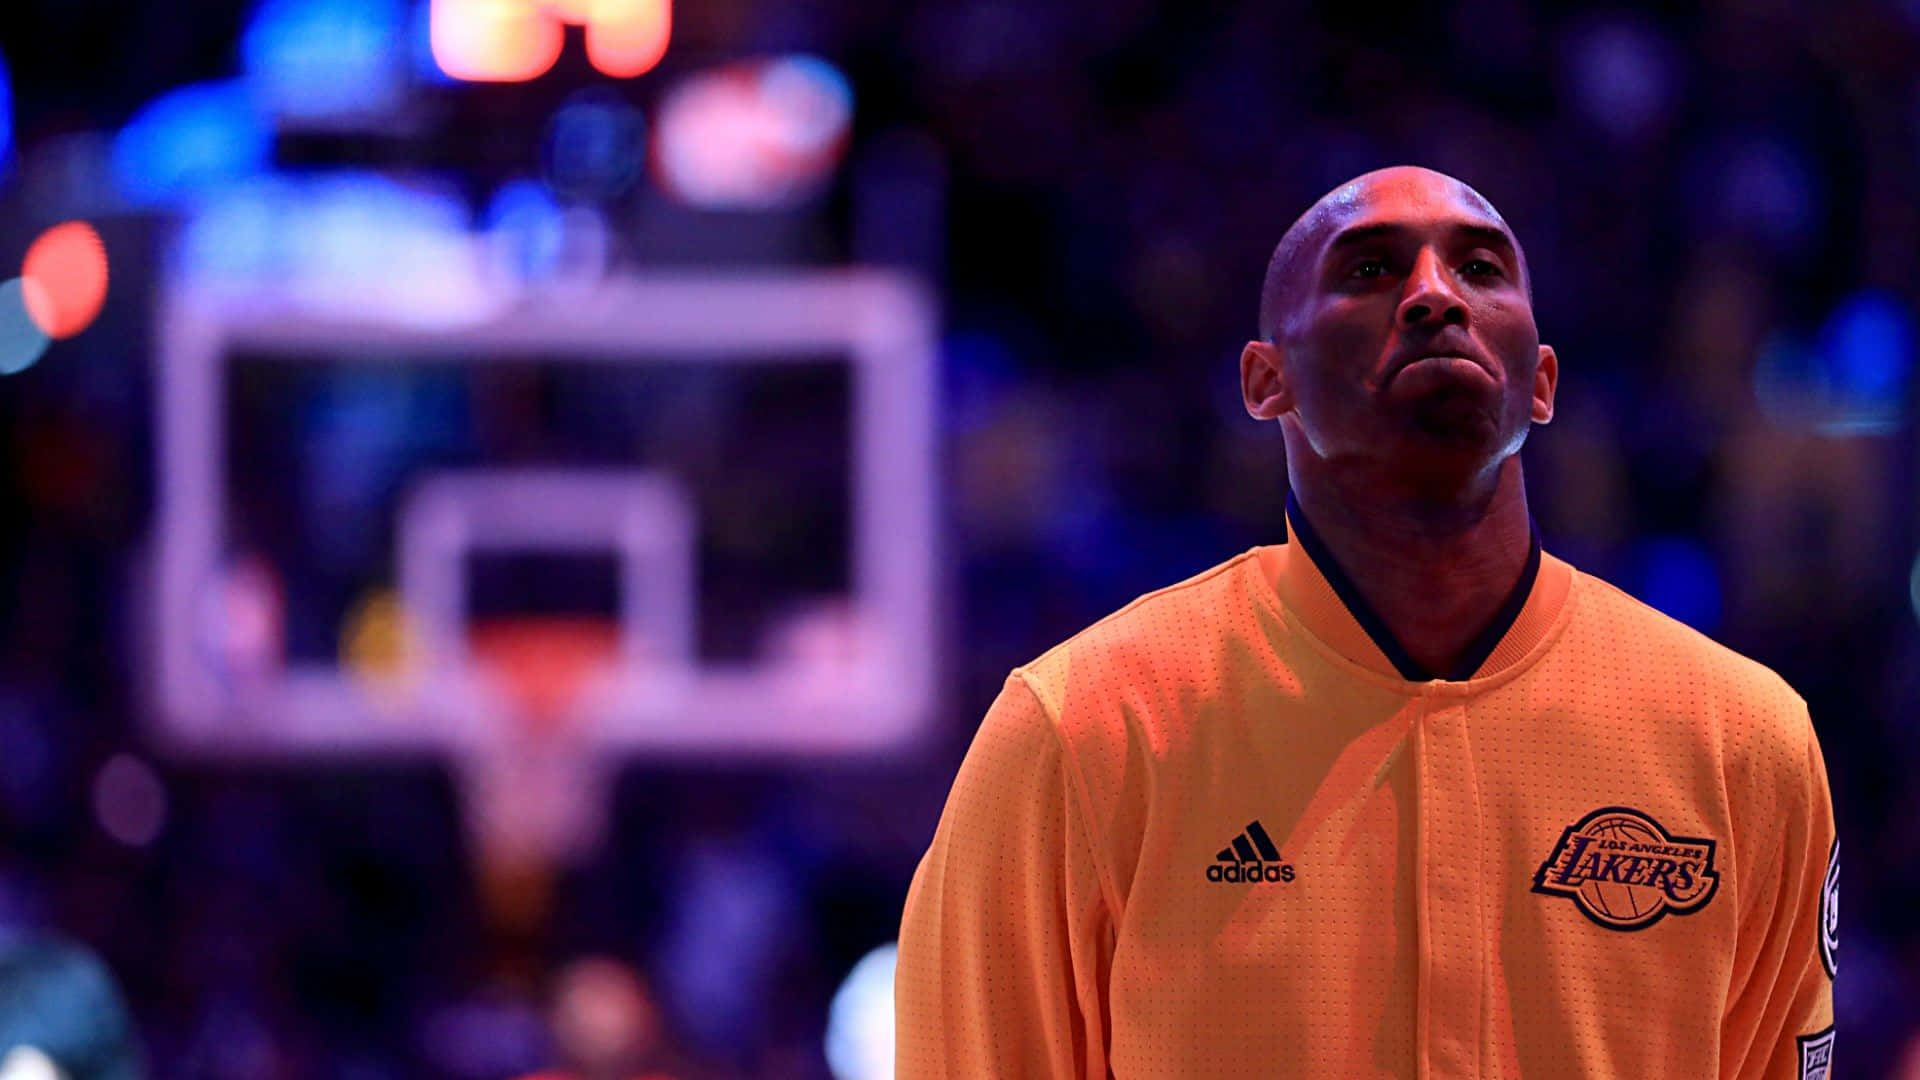 "Mamba mentality: never give up"